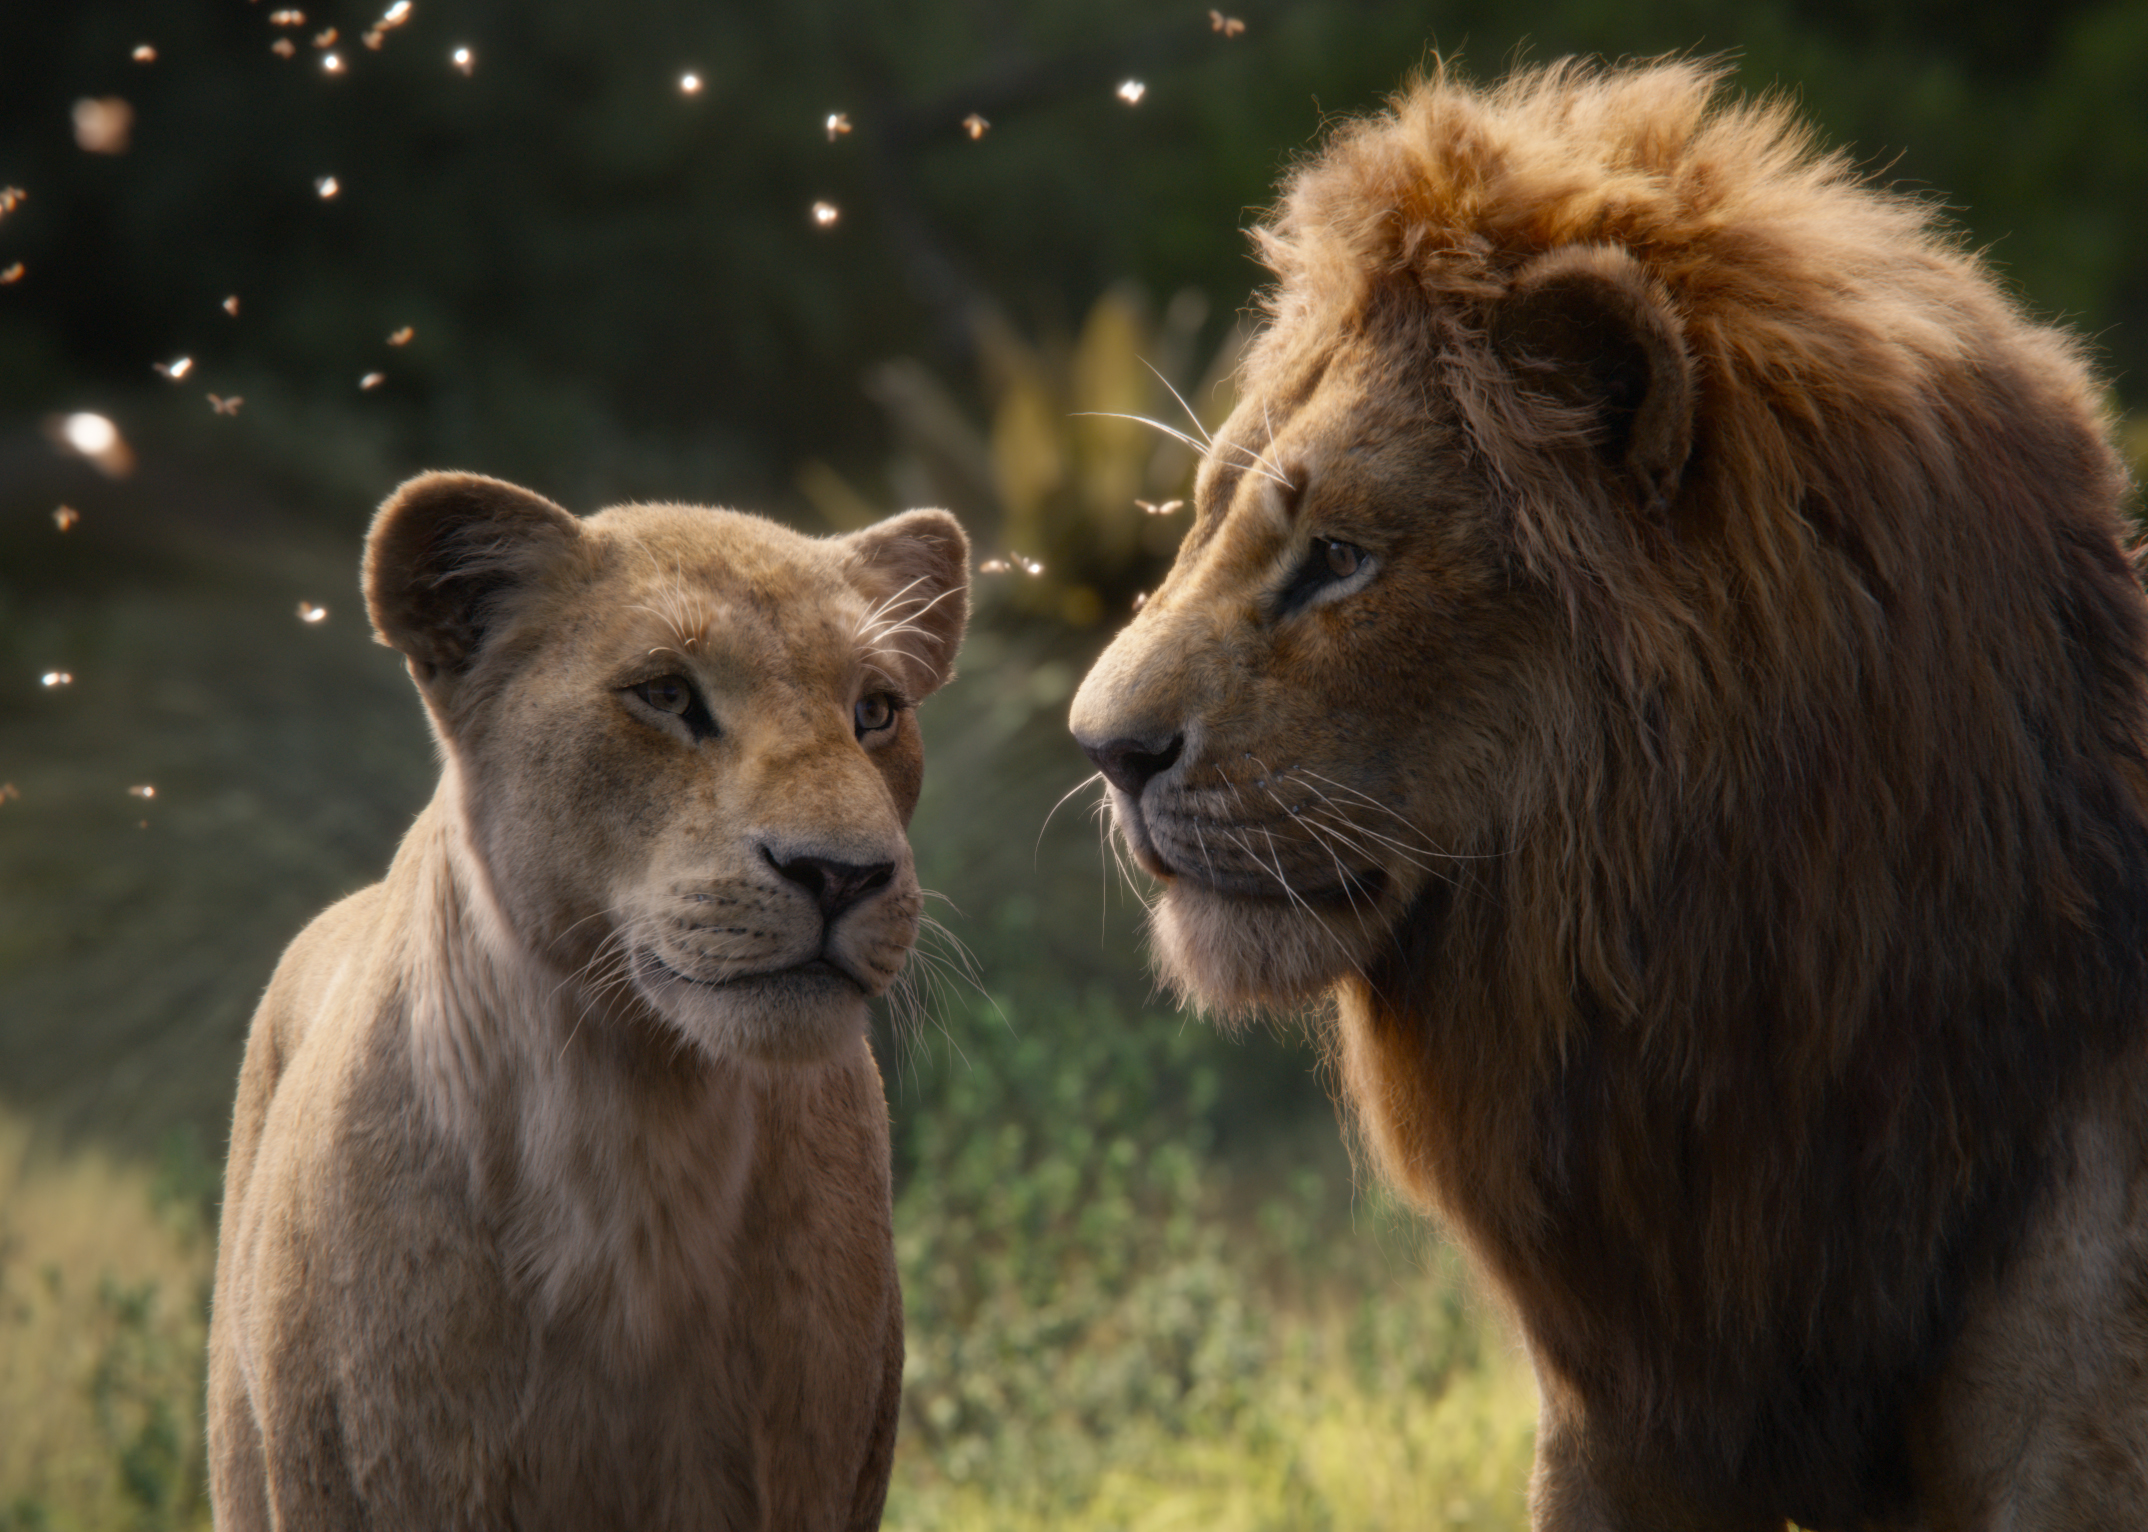 The Lion King Review: The enrapturing visual effects is the true king in Donald Glover and Beyonce's film